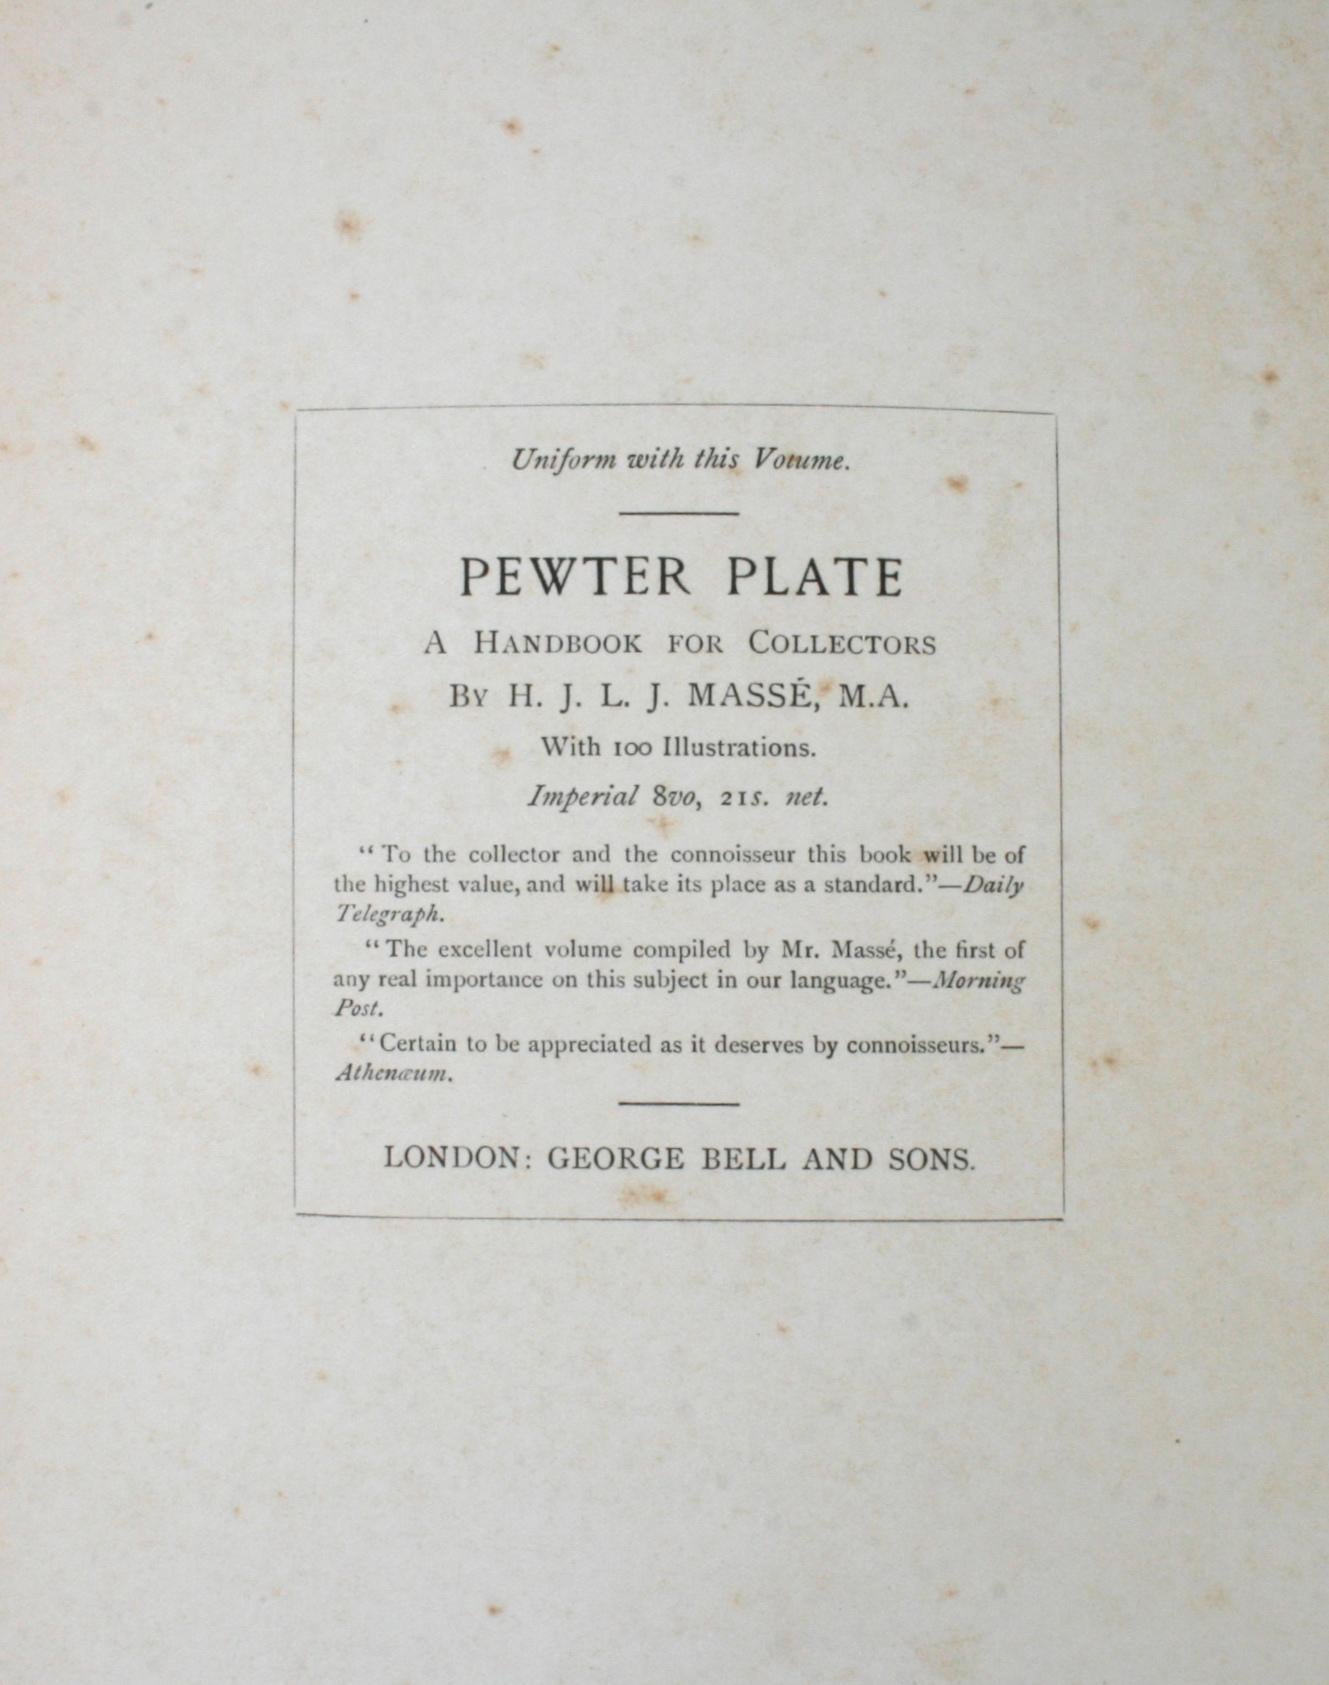 Sheffield plate by Henry Newton Veitch. London: George Bell and Sons, 1908. 1st edition hardcover with no dust jacket. 359 pp. An fascinating antique book on the history, manufacture and art of Sheffield silver plate. The process of plating silver